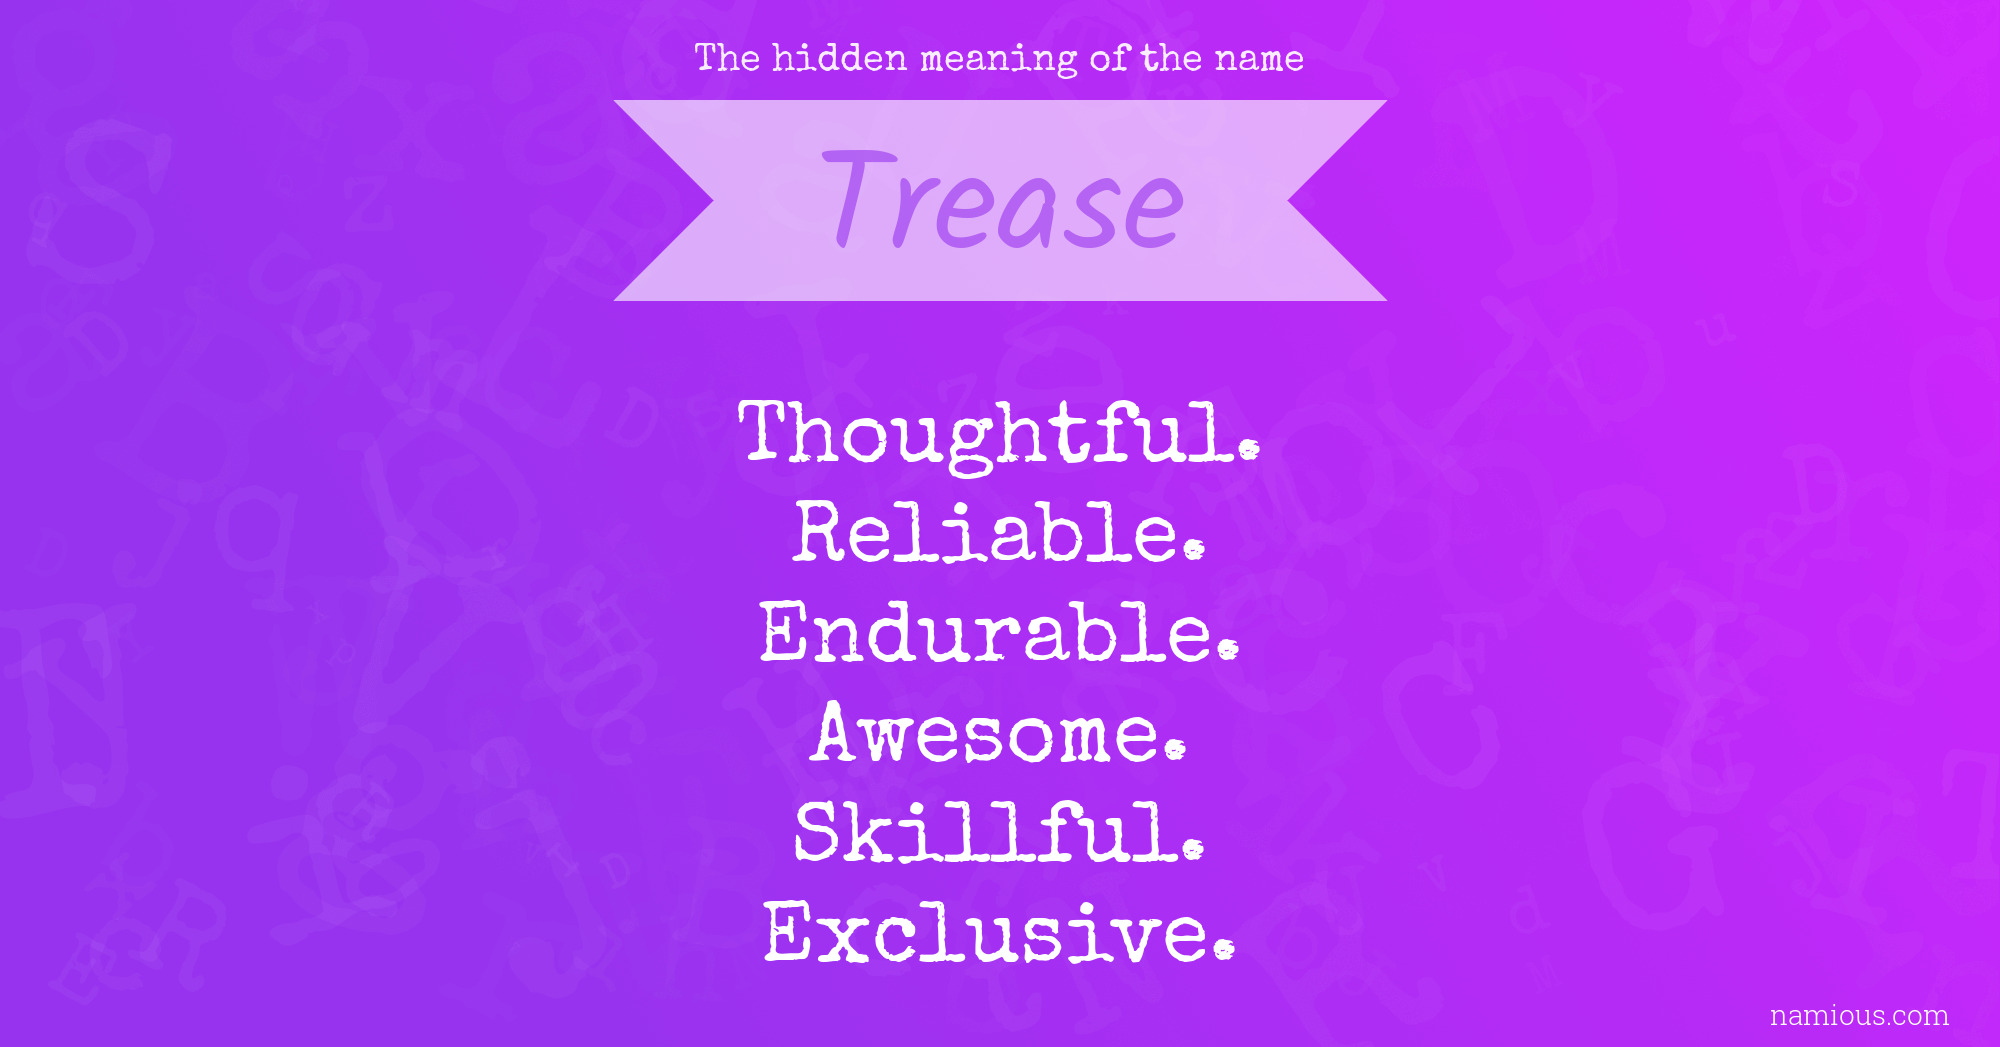 The hidden meaning of the name Trease